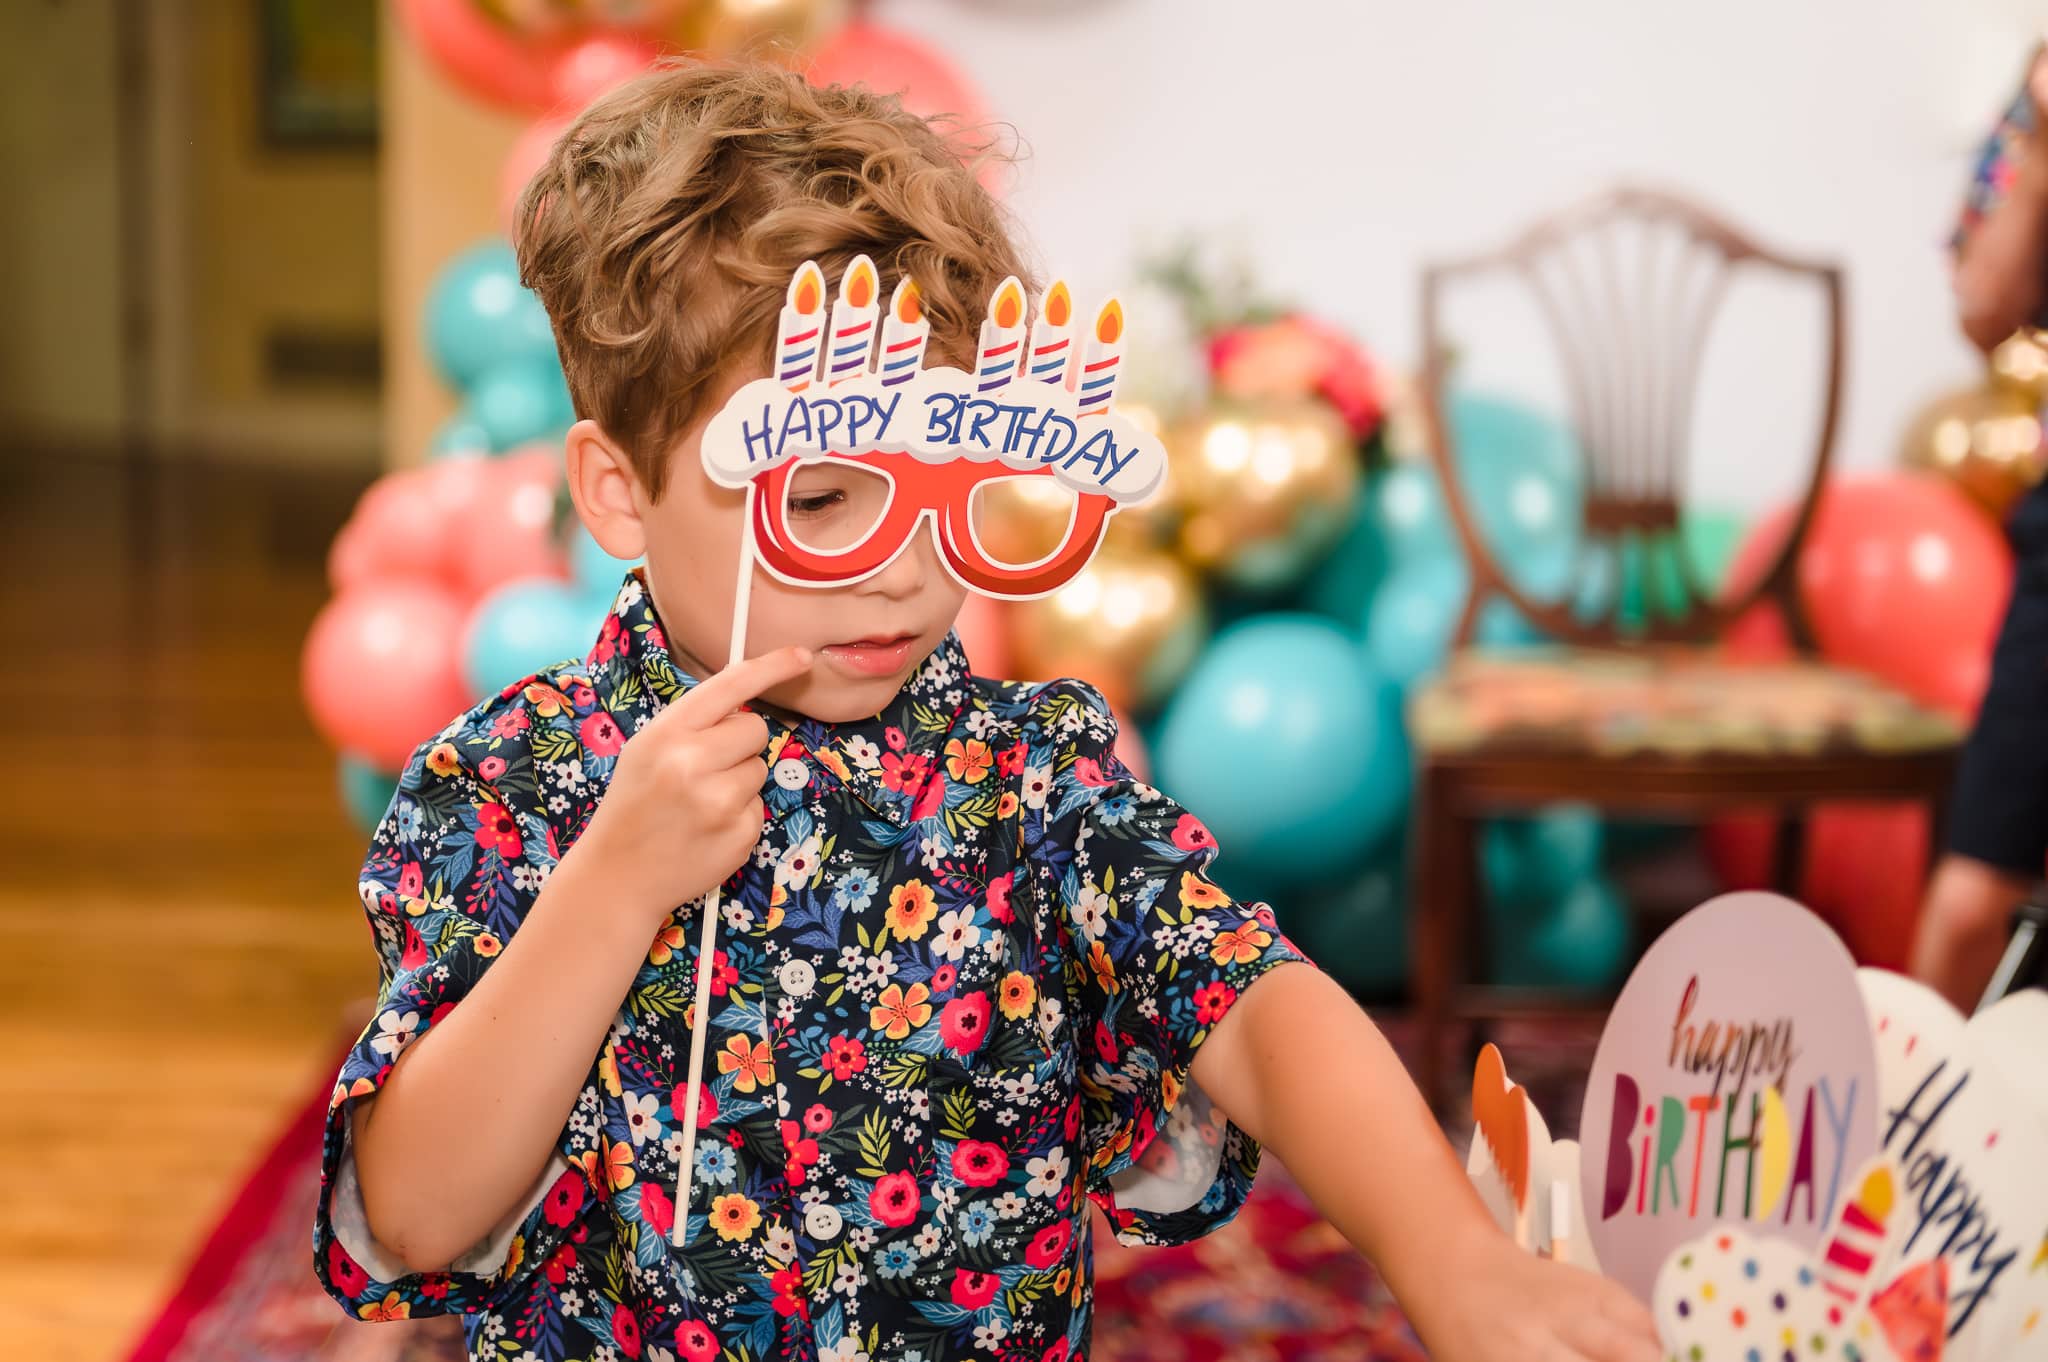 A little boy holds a pair of fun glasses that say "happy birthday" for a photo booth at a senior birthday party.